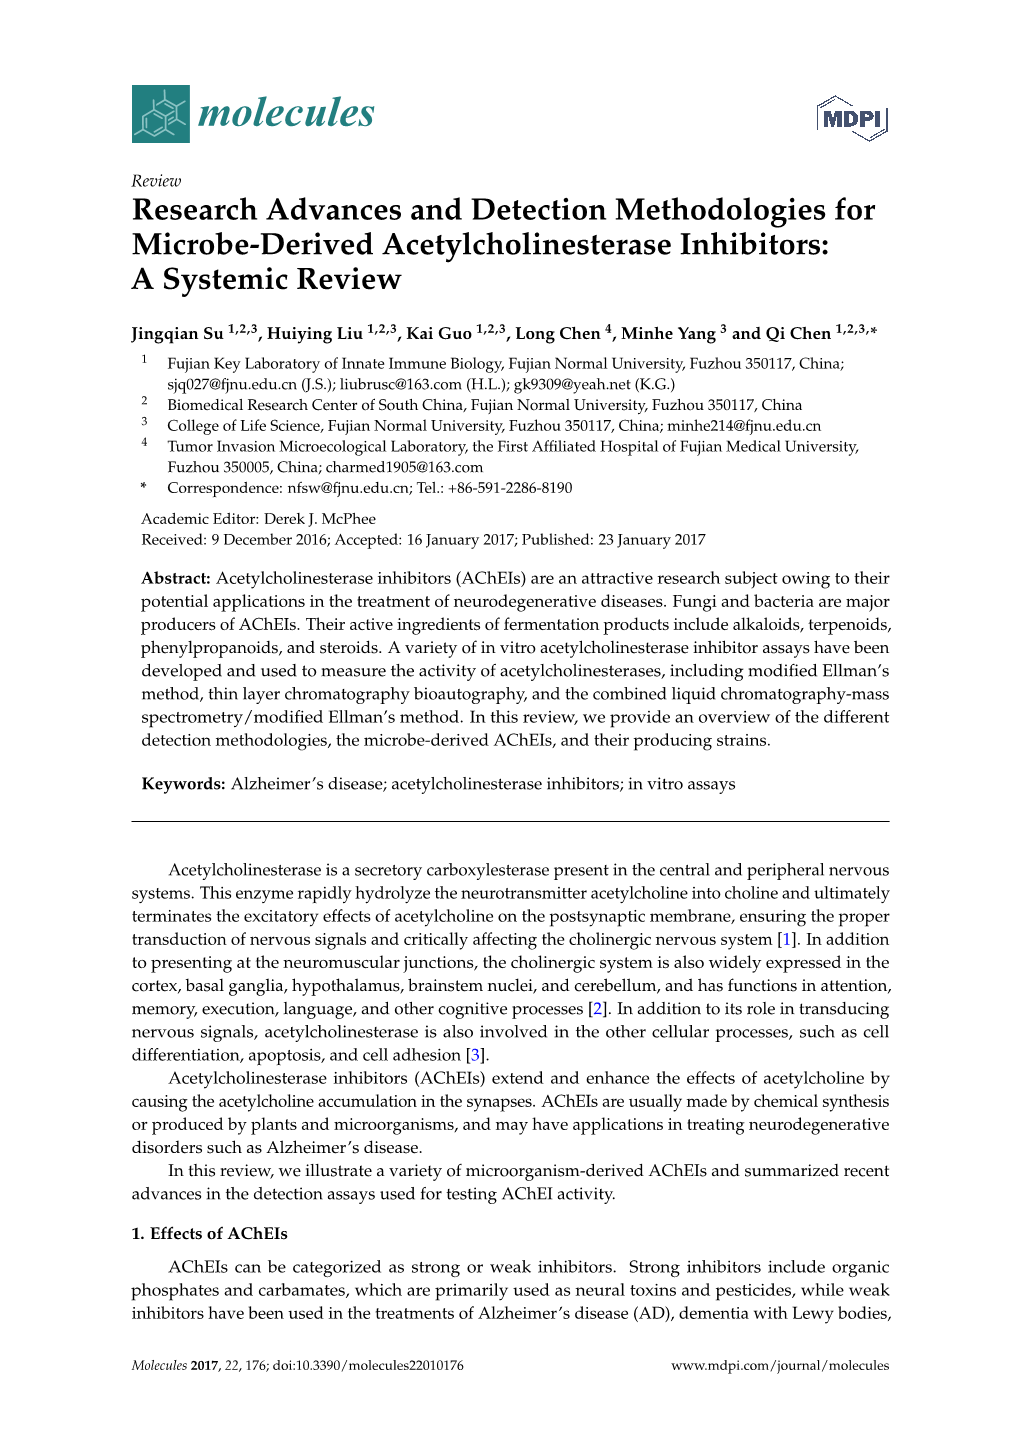 Research Advances and Detection Methodologies for Microbe-Derived Acetylcholinesterase Inhibitors: a Systemic Review